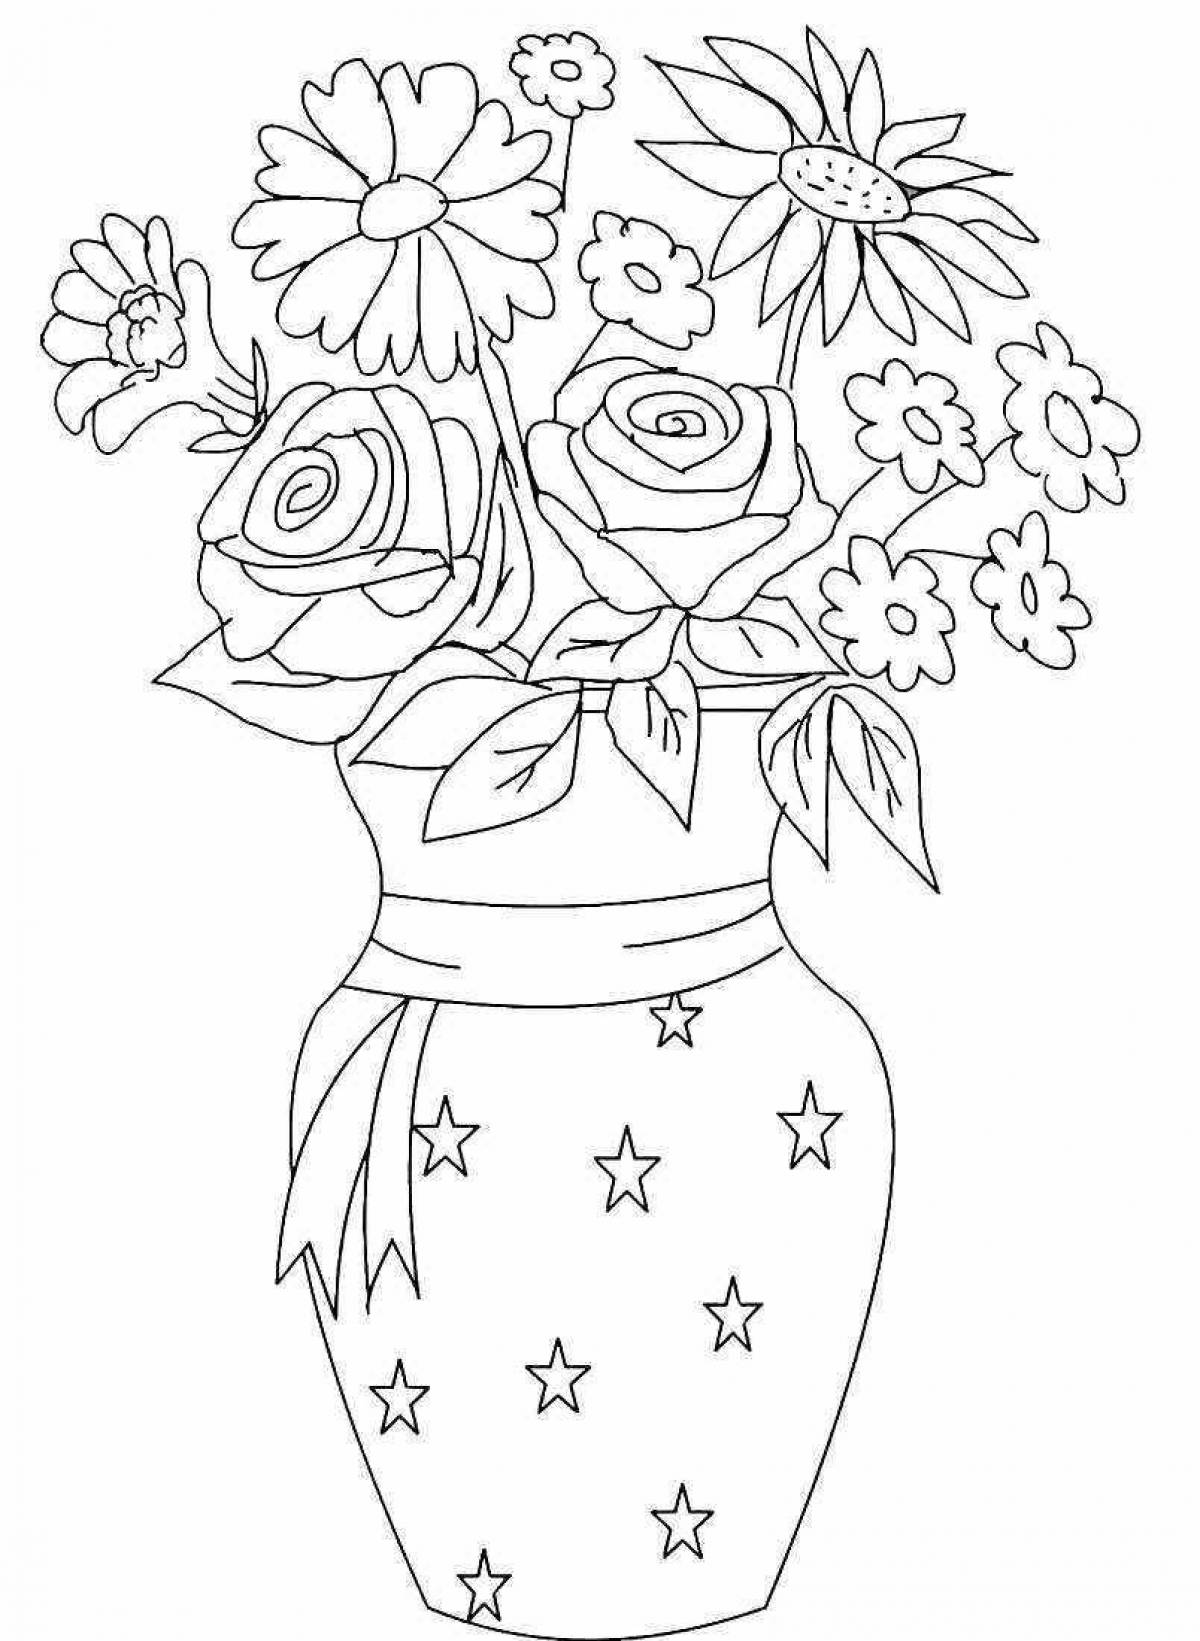 Adorable flowers in a vase coloring book for preschoolers